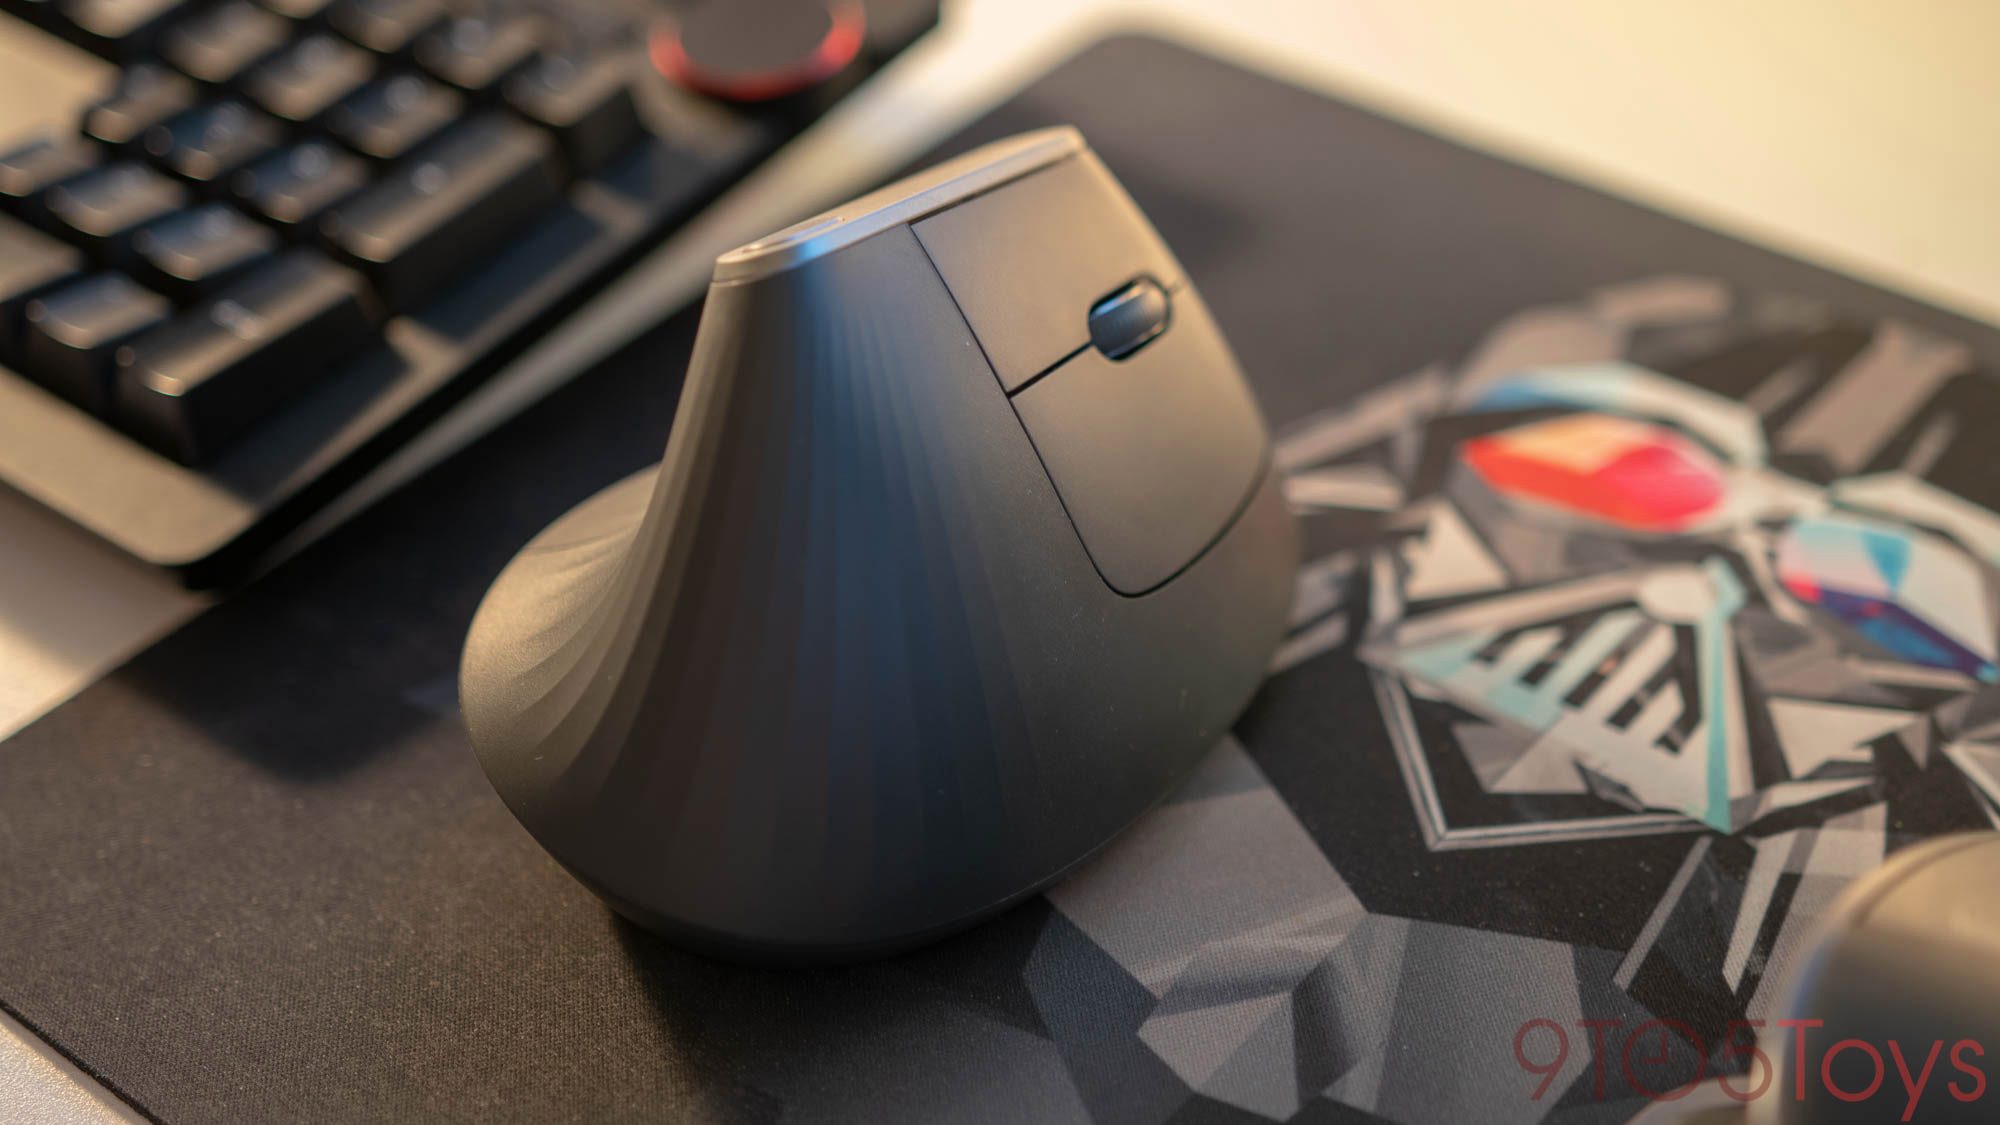 Hands-on: Logitech's MX Vertical changed the way I look at mice - 9to5Mac